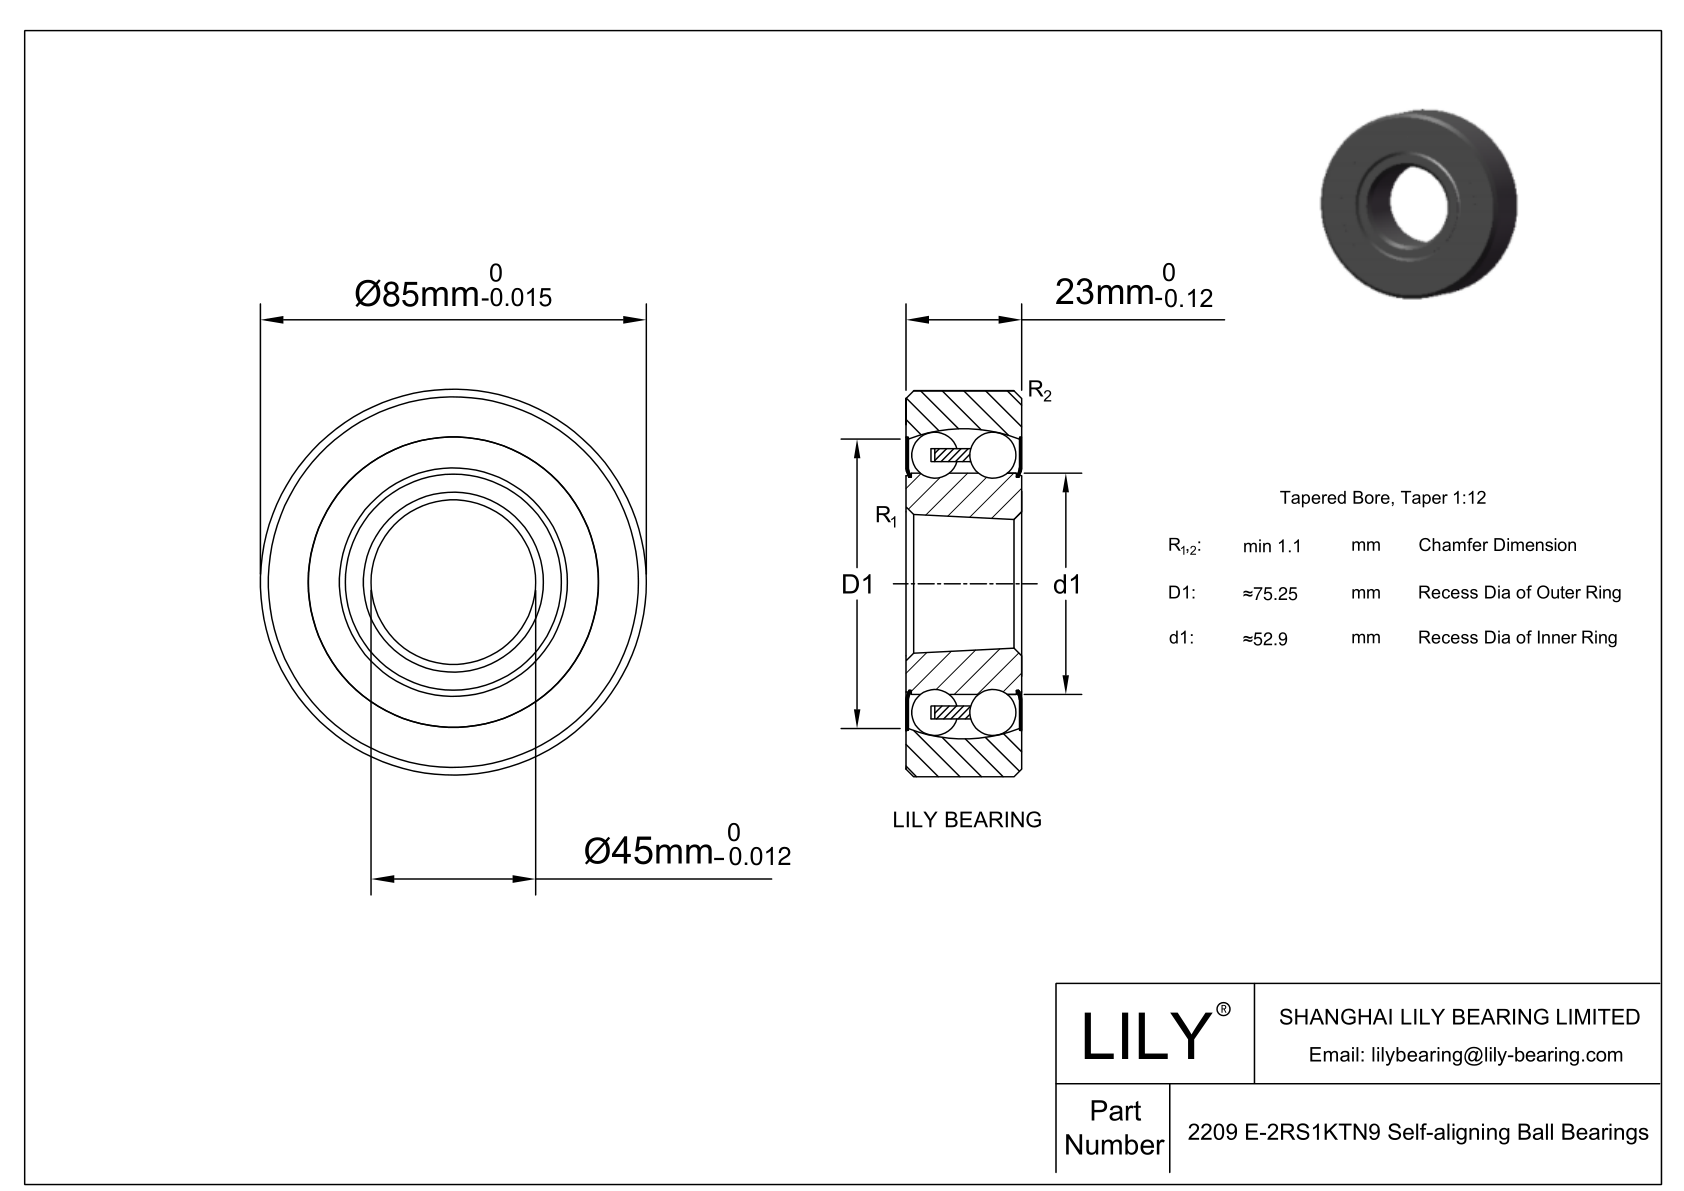 CE2209 E-SCPP Silicon Carbide Self Aligning Ball Bearings cad drawing